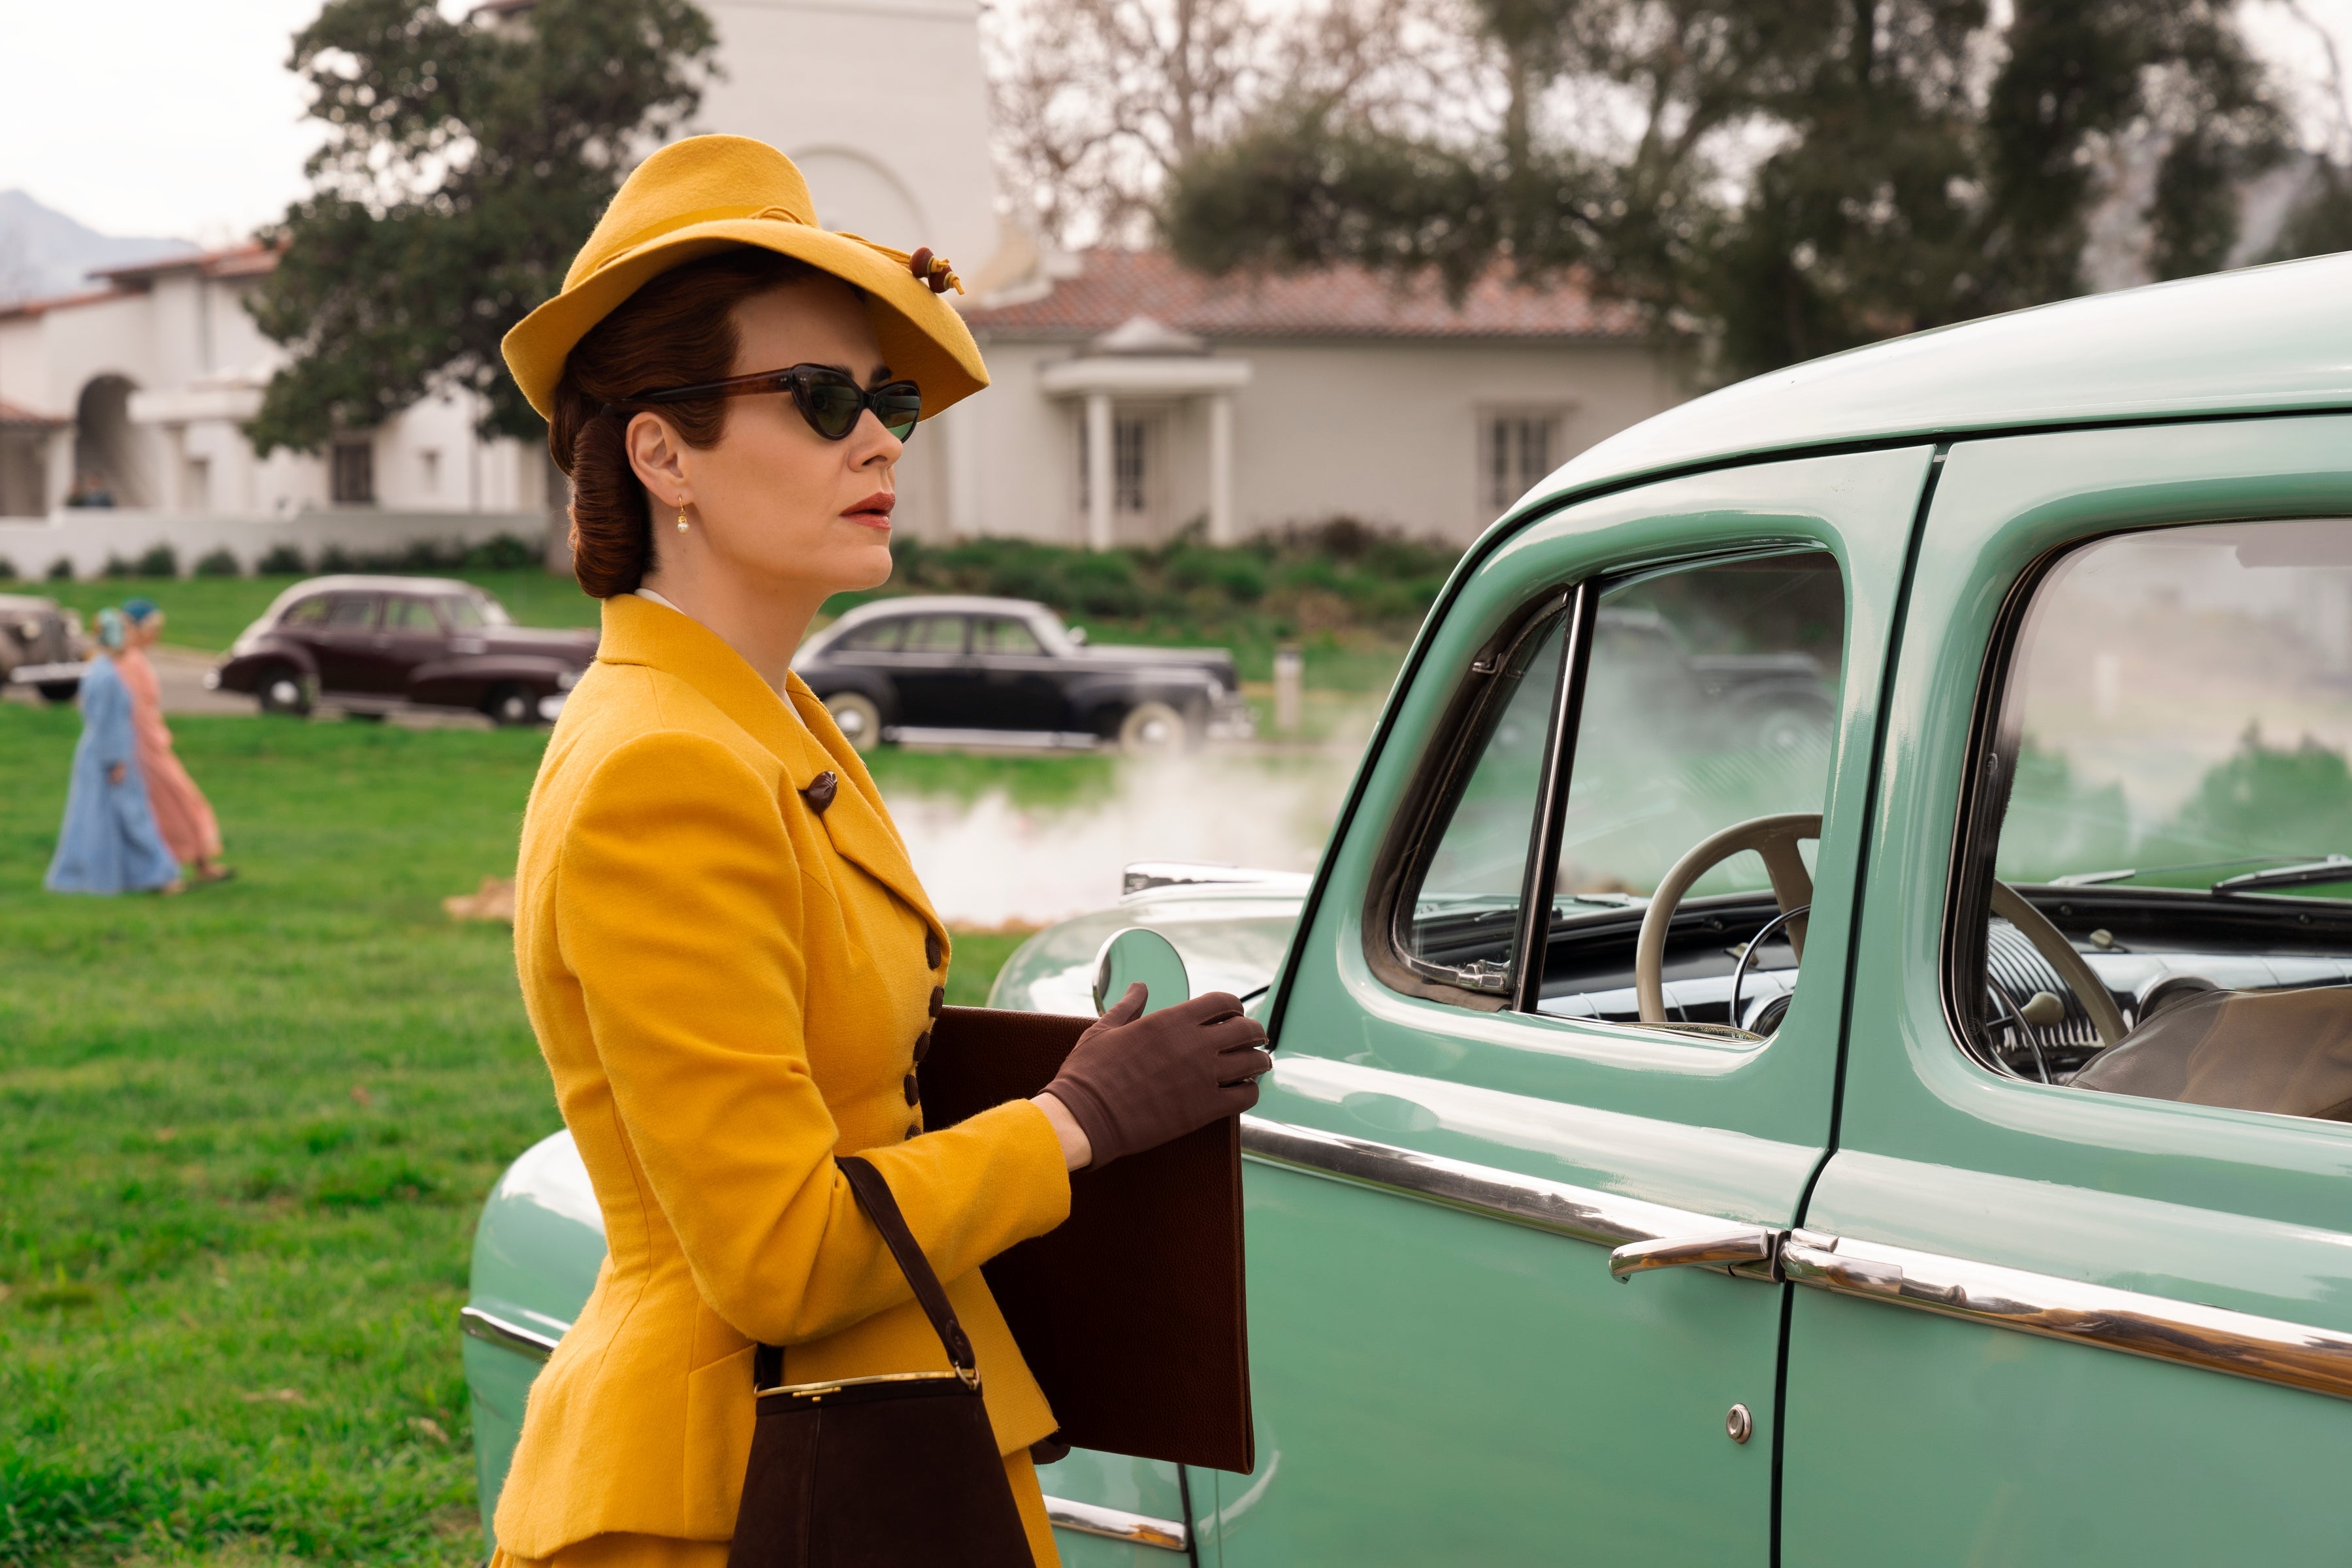 Sarah Paulson as Mildred Ratched, in a yellow suit with sunglasses in front of an old-fashioned automobile.